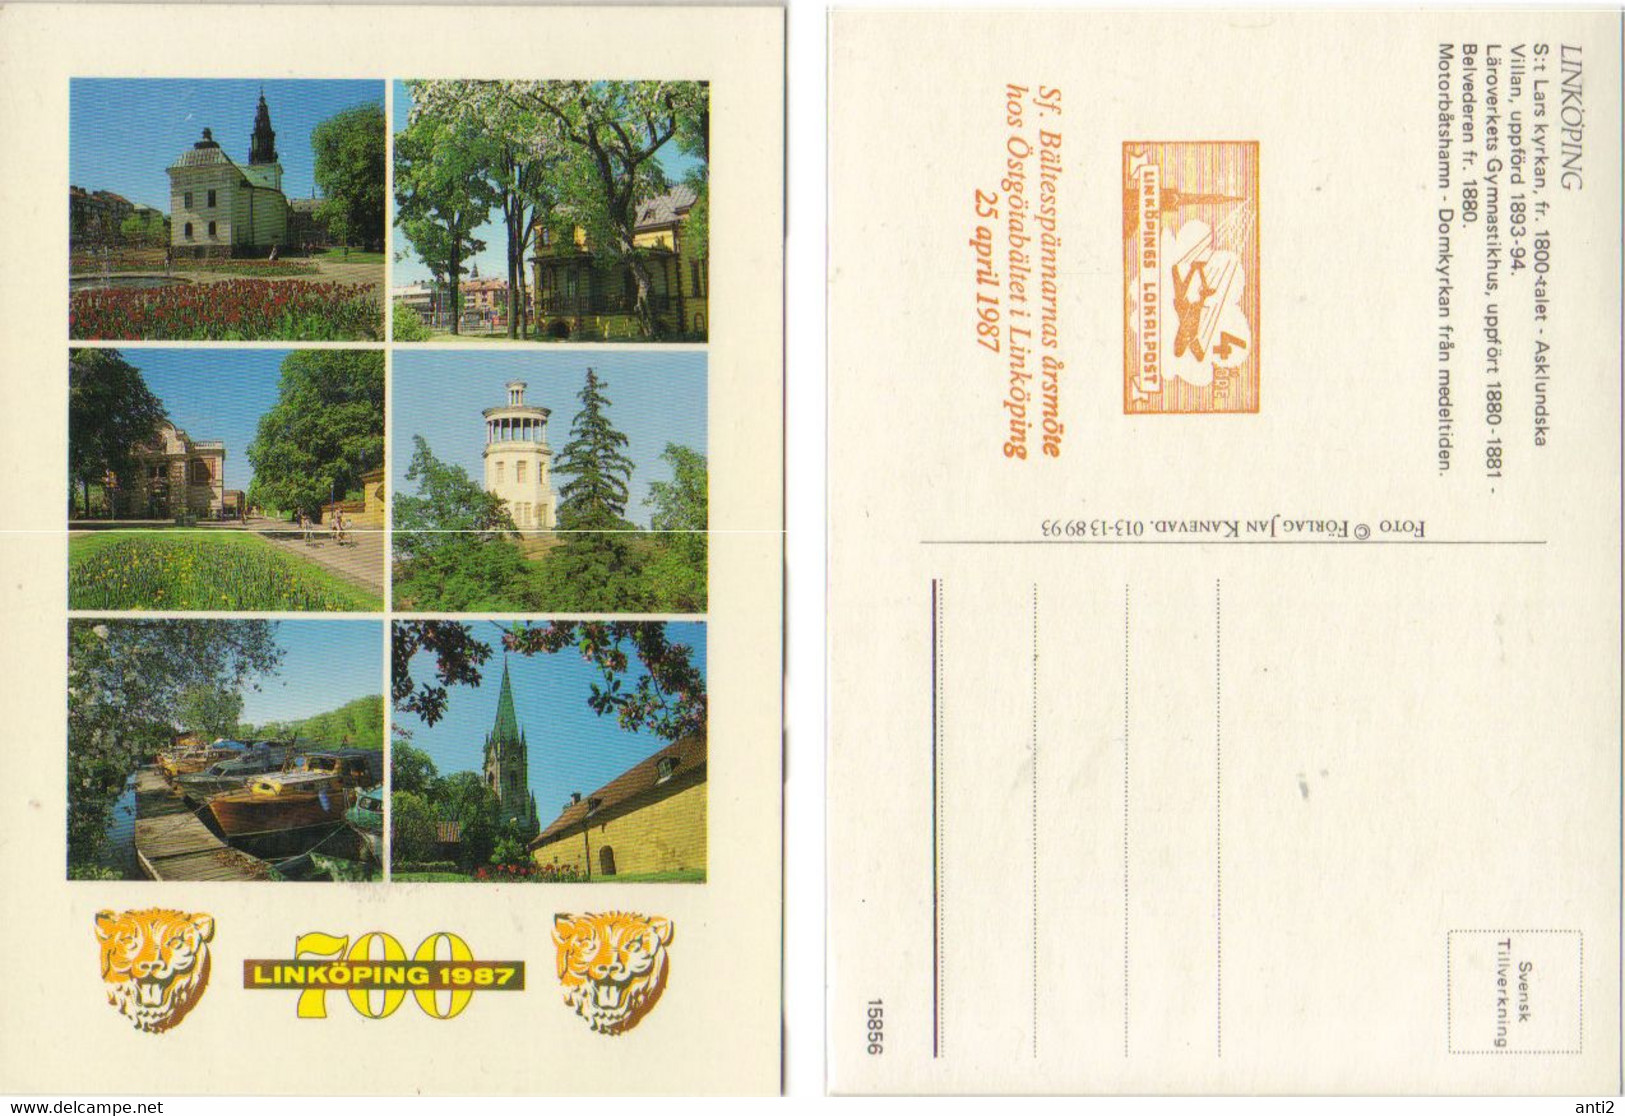 Sweden 1987 Linköping 700 Years, Card For Jubileet, With Imprinted Local Stamp 4 øre - Local Post Stamps